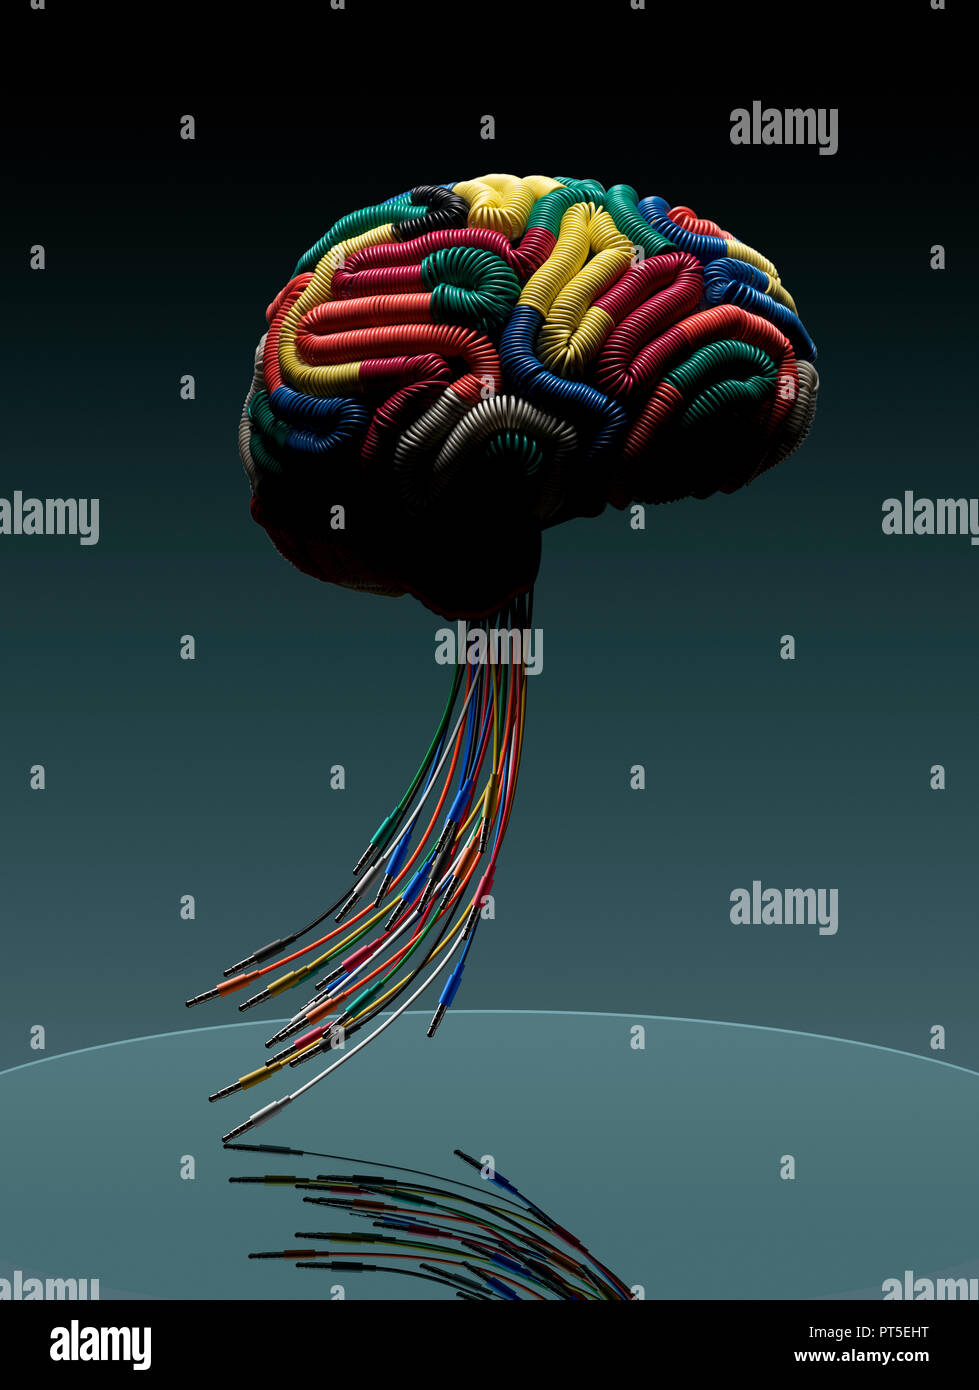 Concept Brain connected by color wires, Stem made of jack plugs, Wired, Connections Stock Photo